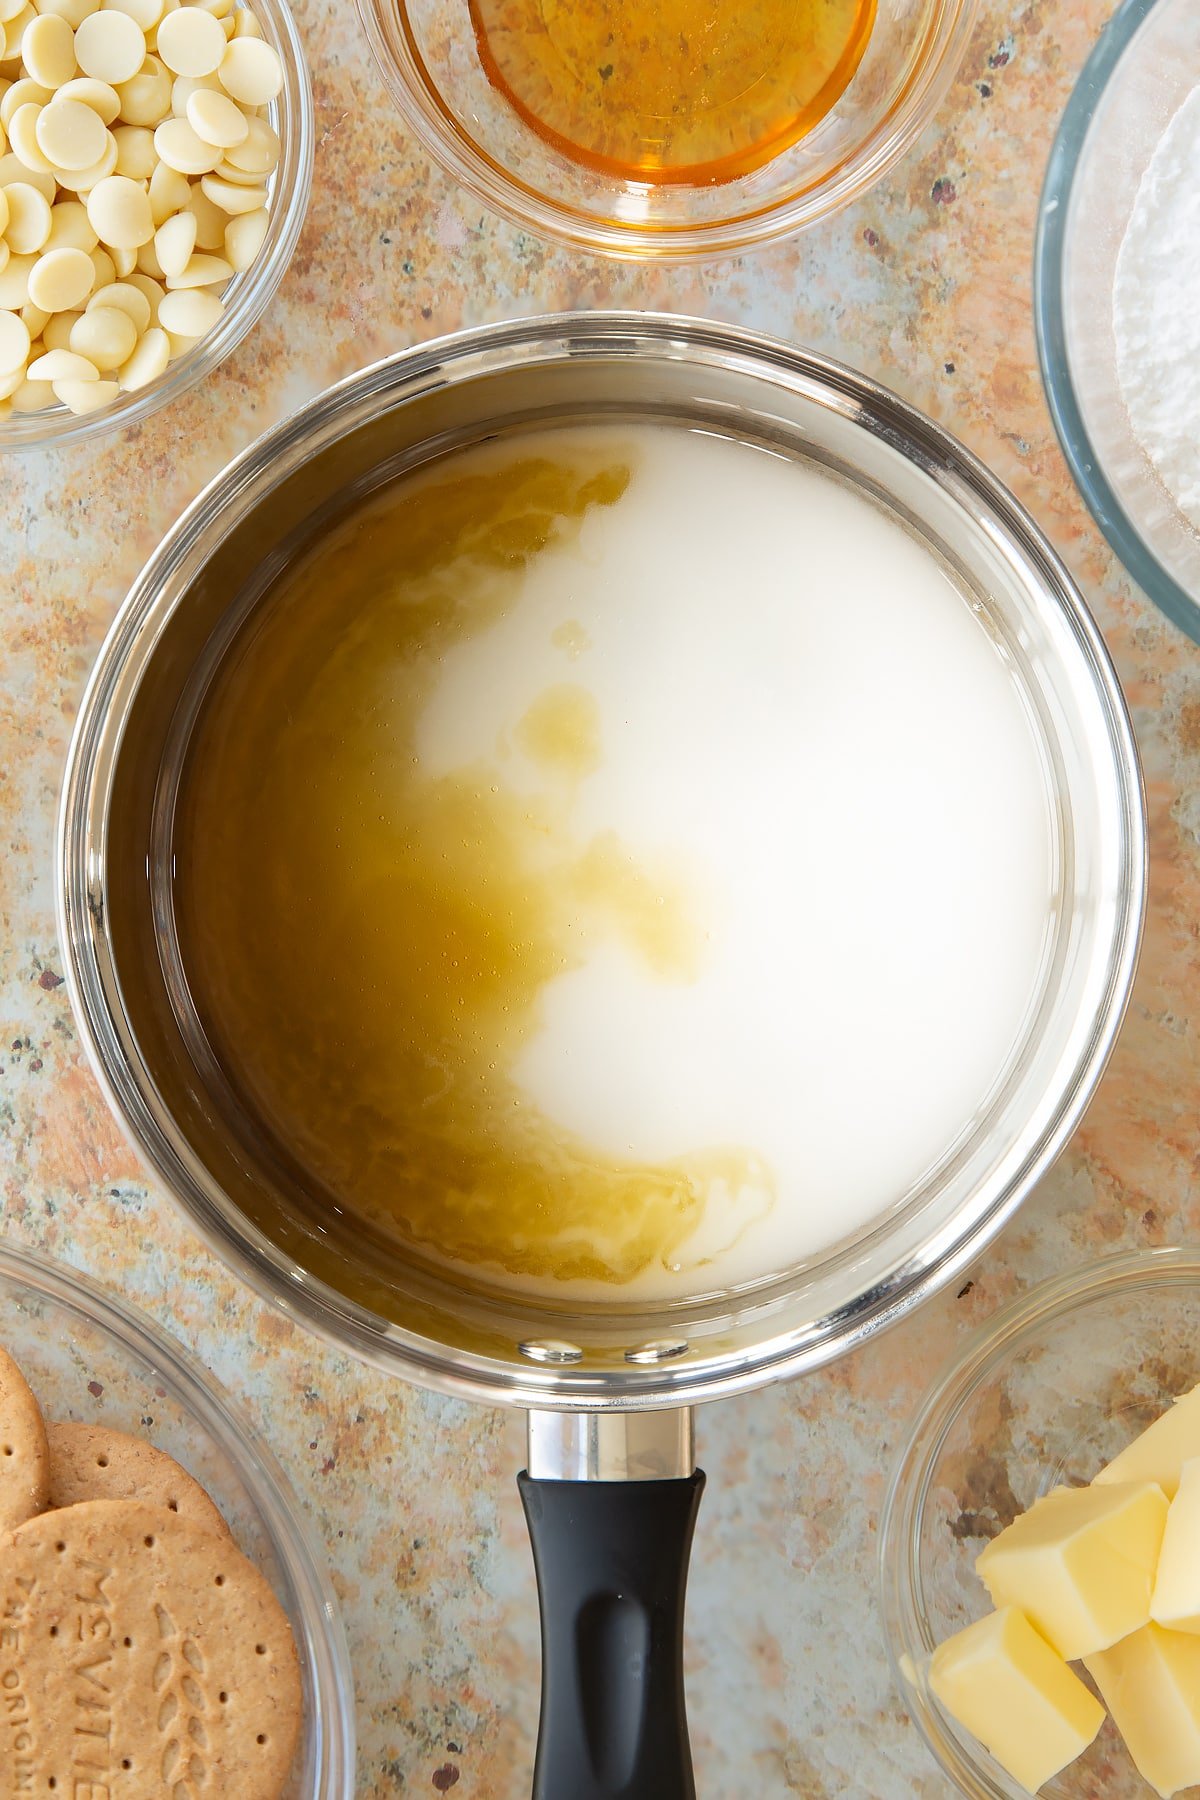 sugar, golden syrup and water in a large saucepan surrounded by bowls of ingredients.